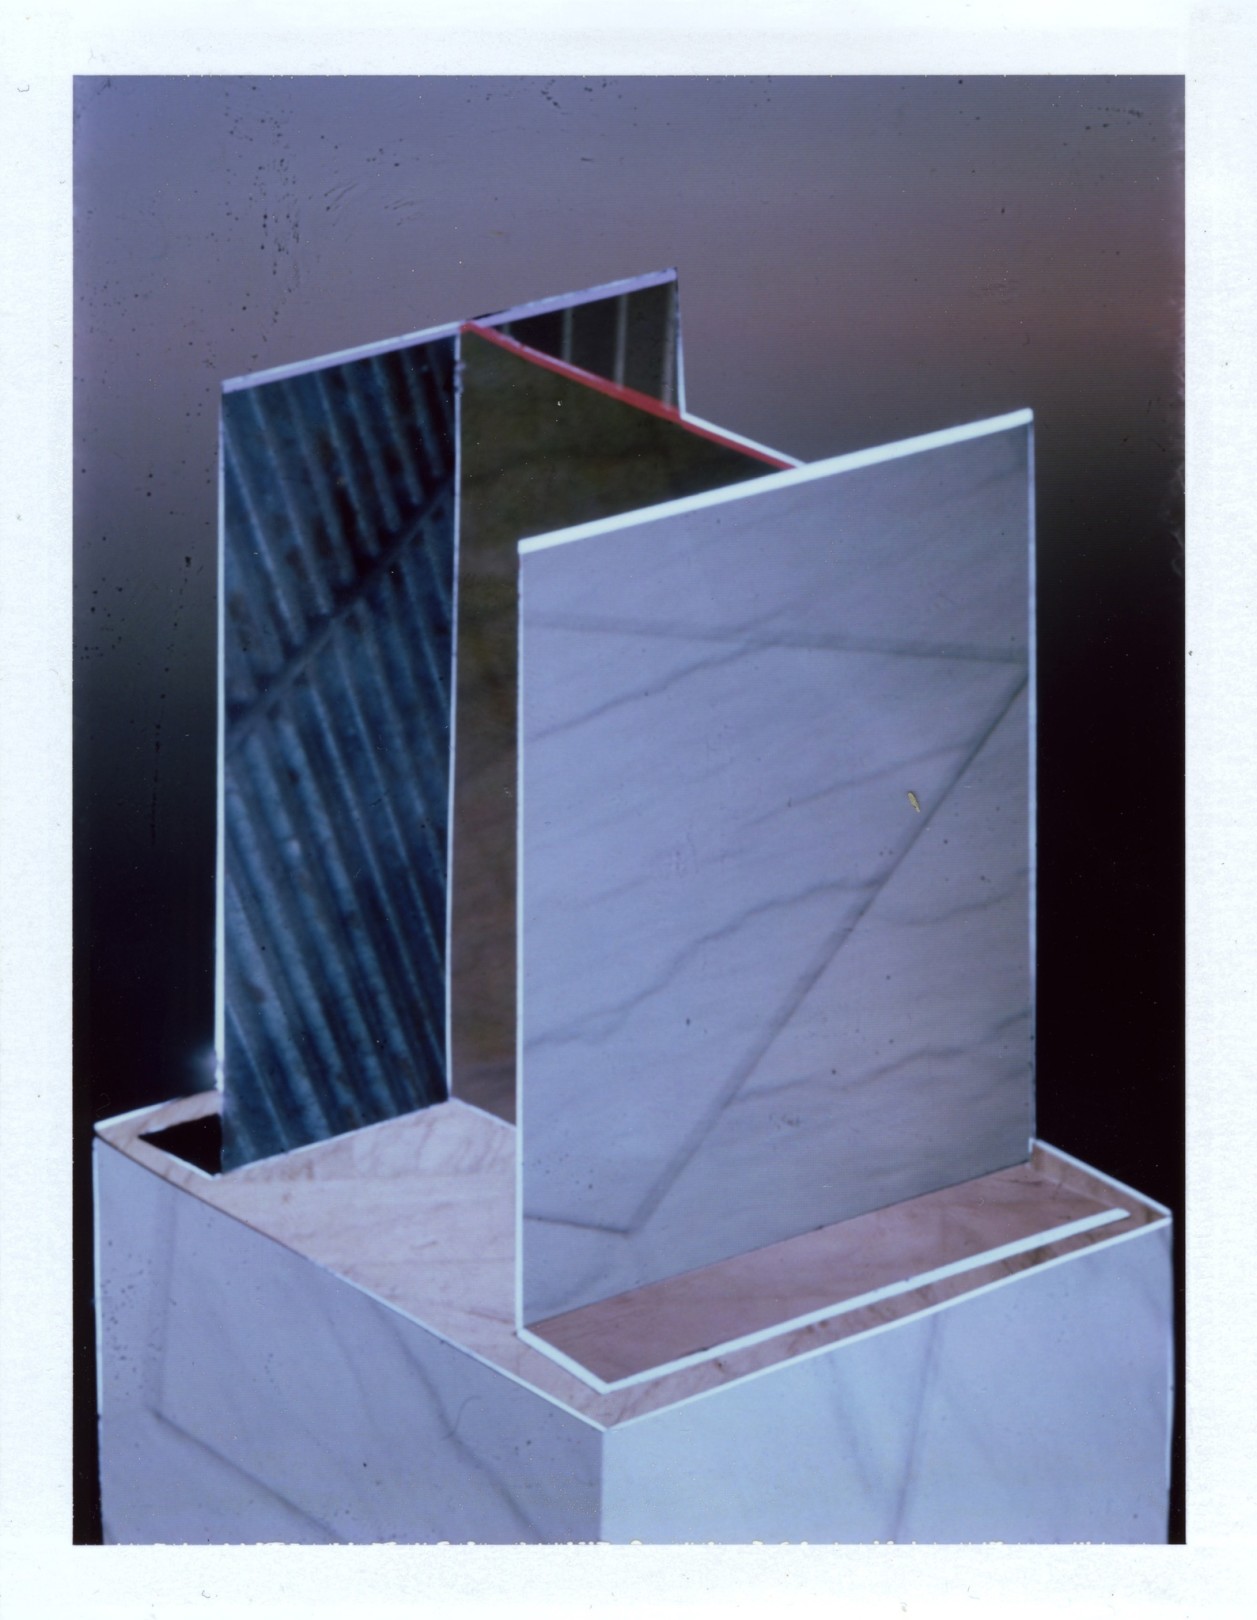 Corey Escoto, It's a Sculpture #2 (Carerra Marble, Tom and Kate, Subway Grate), 2013